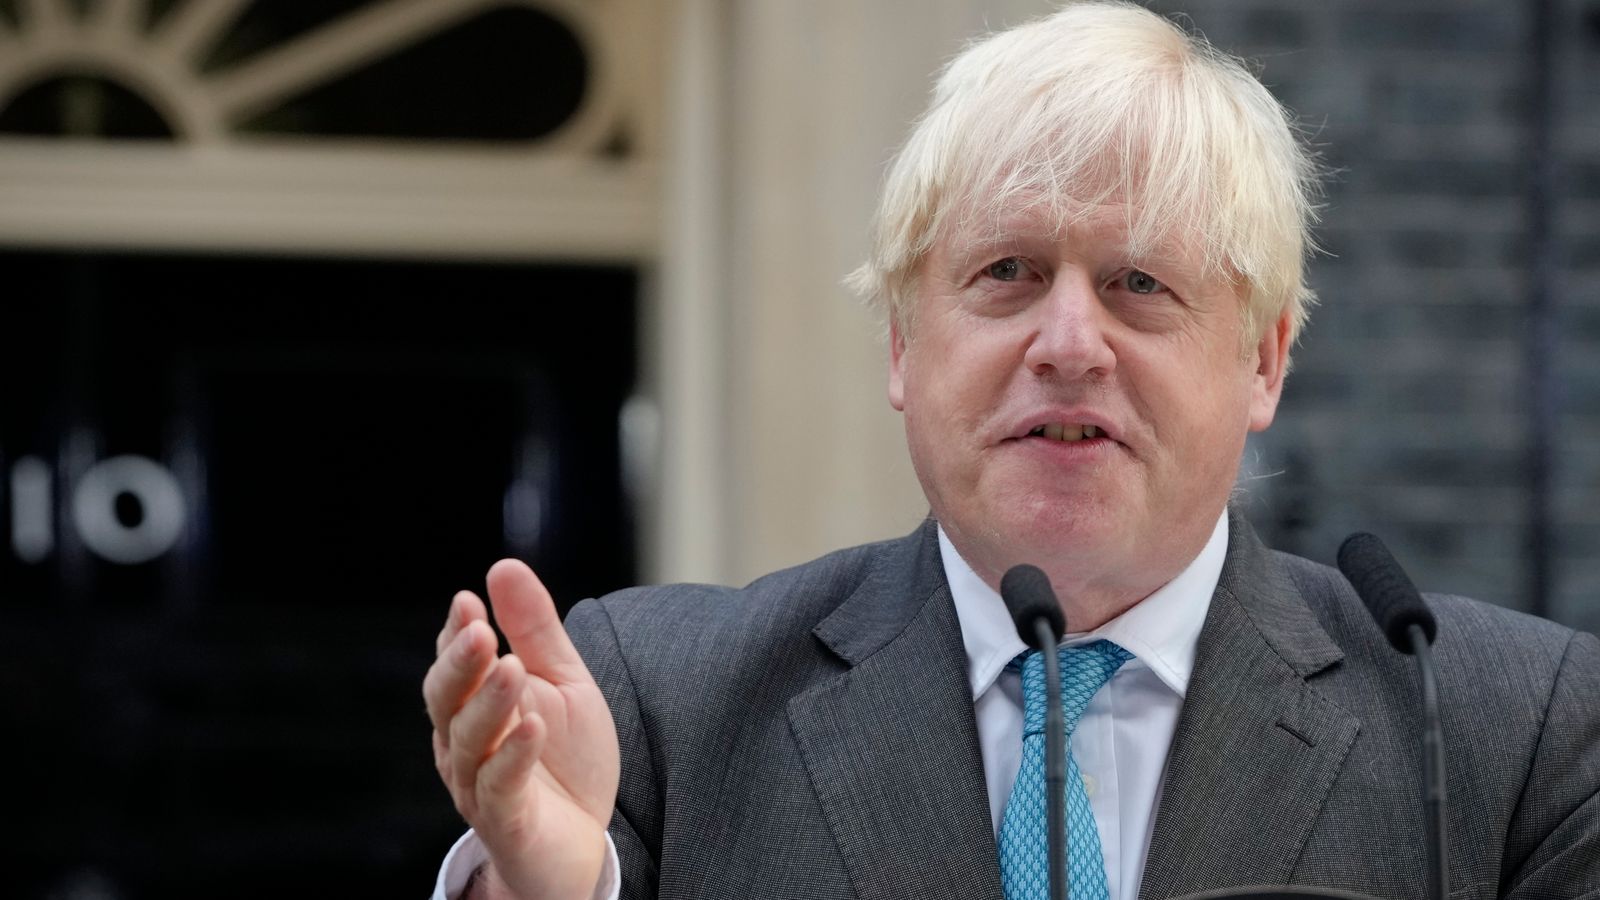 Partygate inquiry: Everything you need to know about the investigation into Boris Johnson